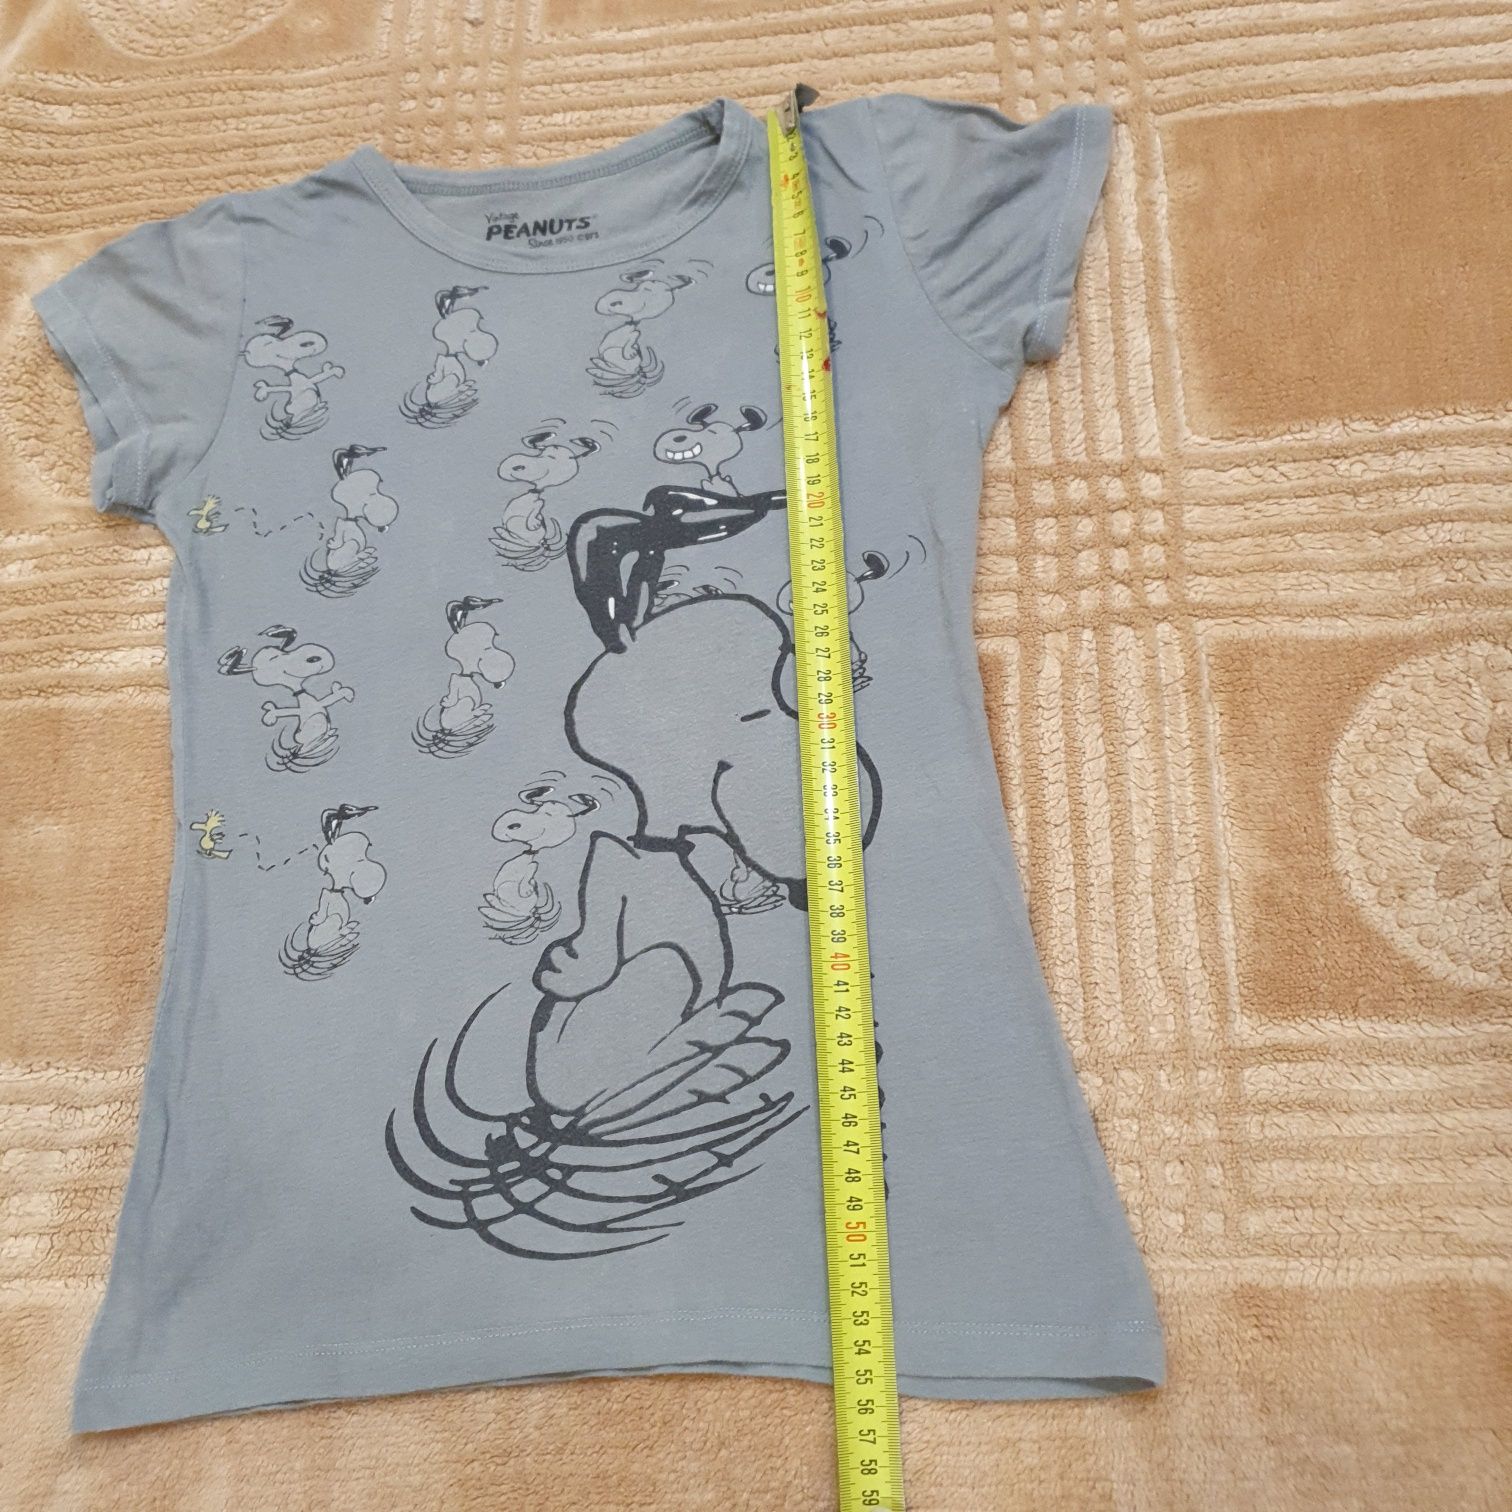 SNOOPY t-shirt vinted